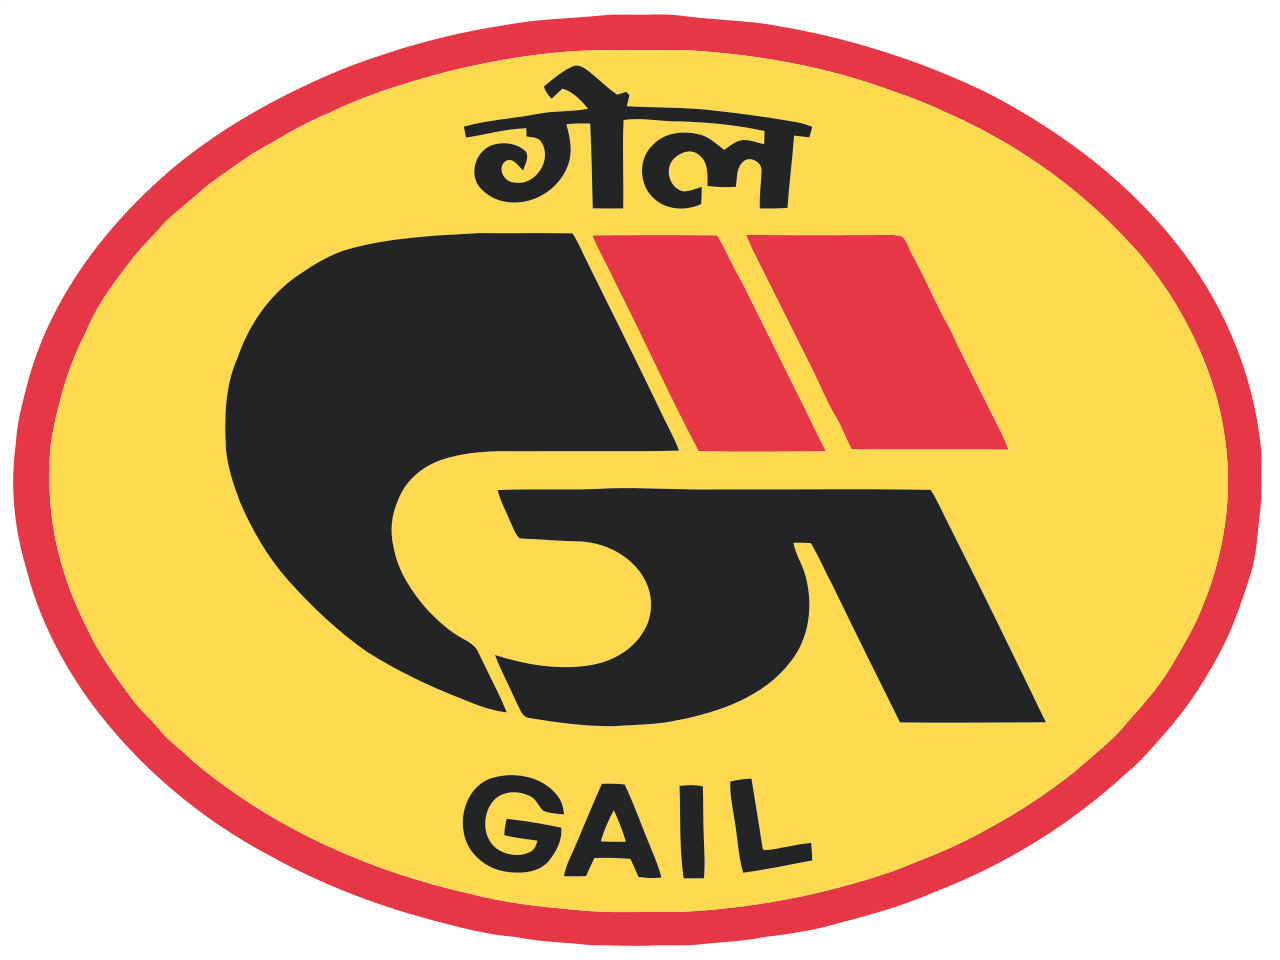 GAIL places order for 341 km of Line Pipes for Phulpur-Haldia / Dhamra Pipeline 